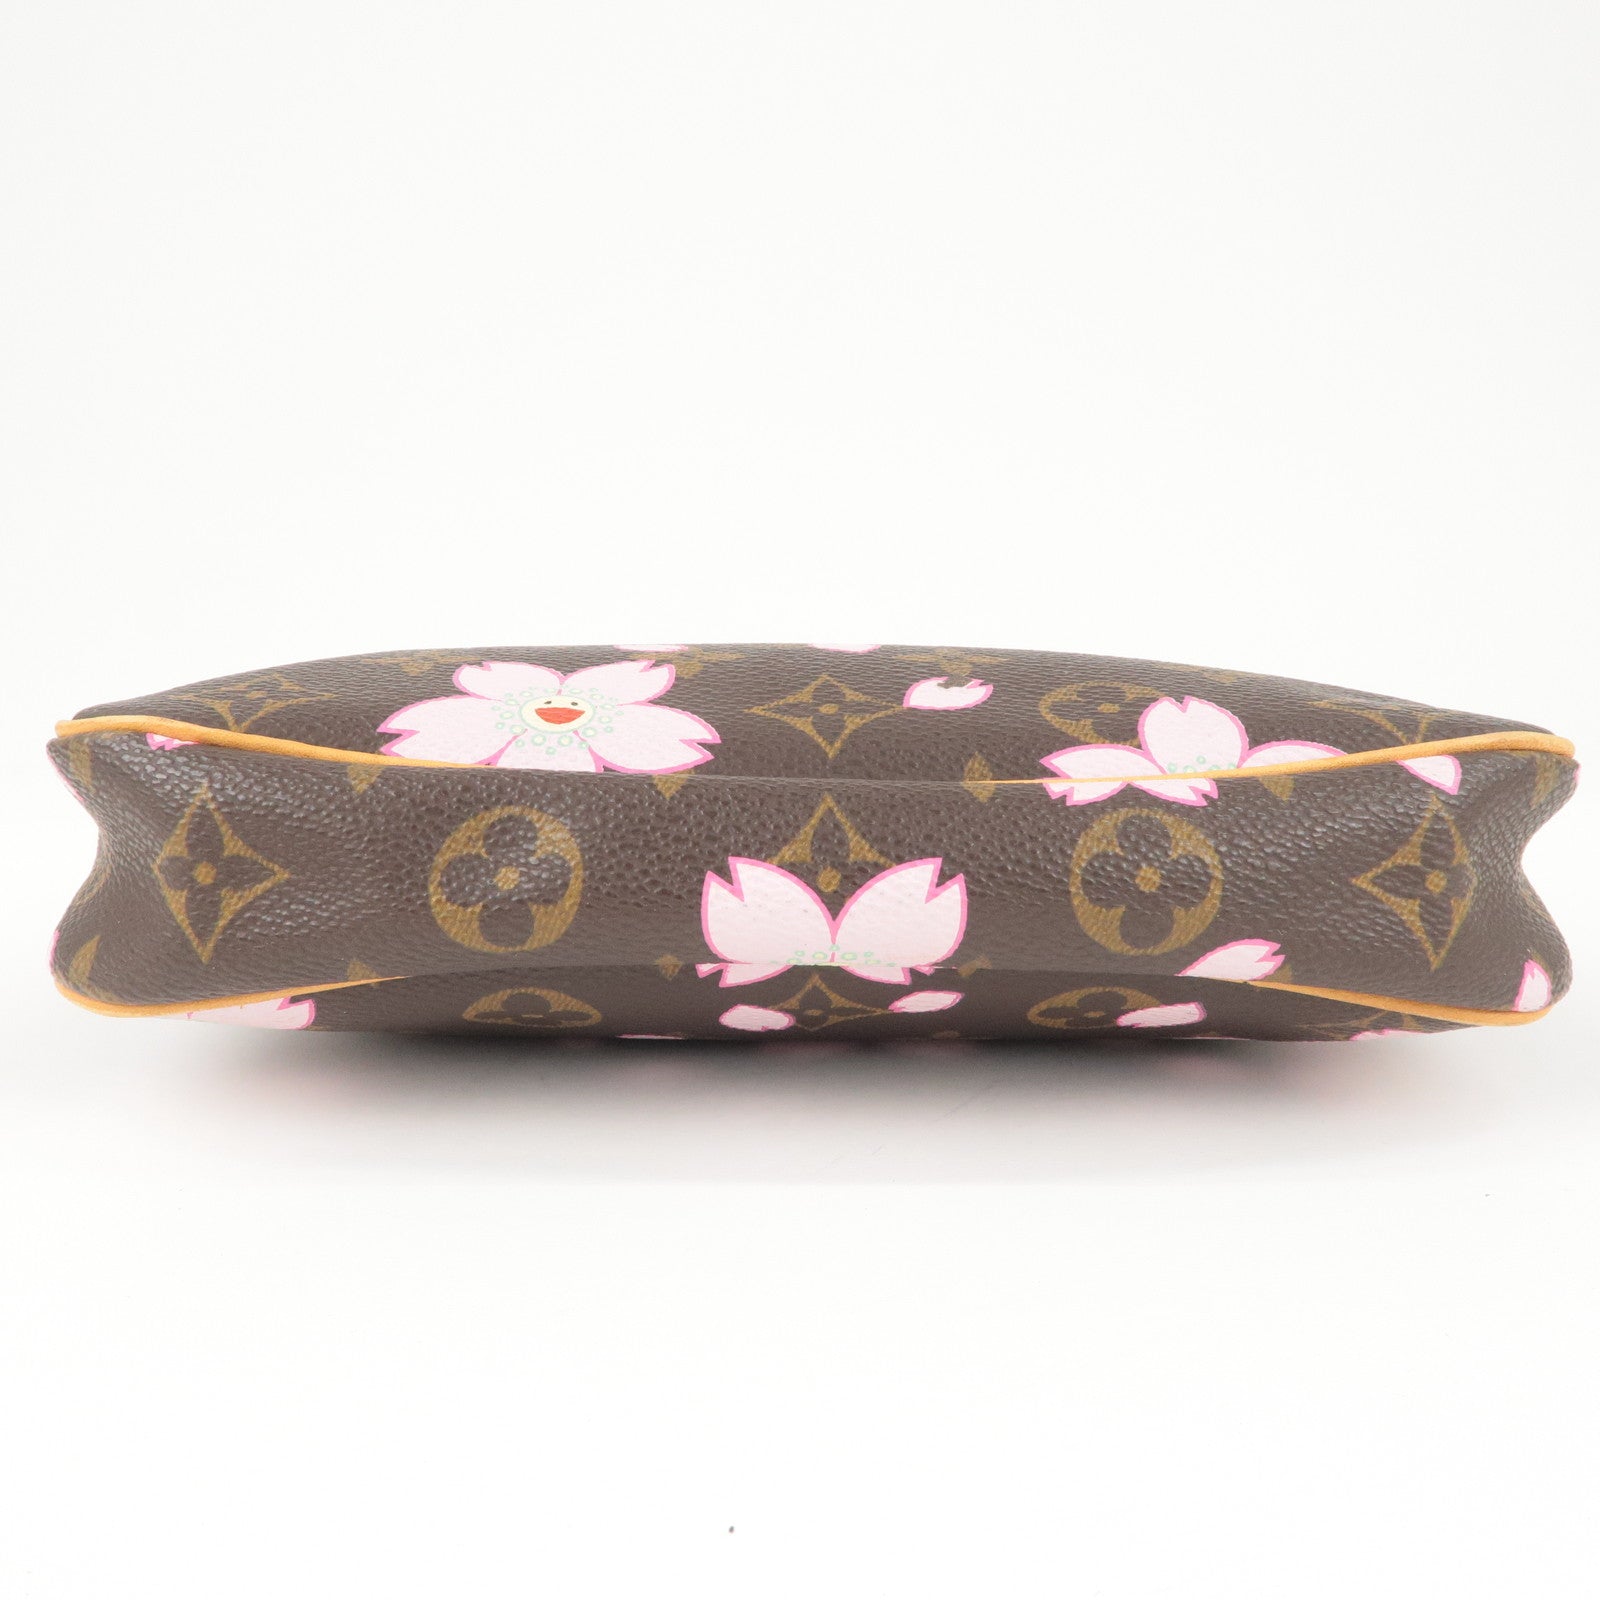 LOUIS VUITTON LIMITED CHERRY BLOSSOM COIN PURSE CARD WALLET at